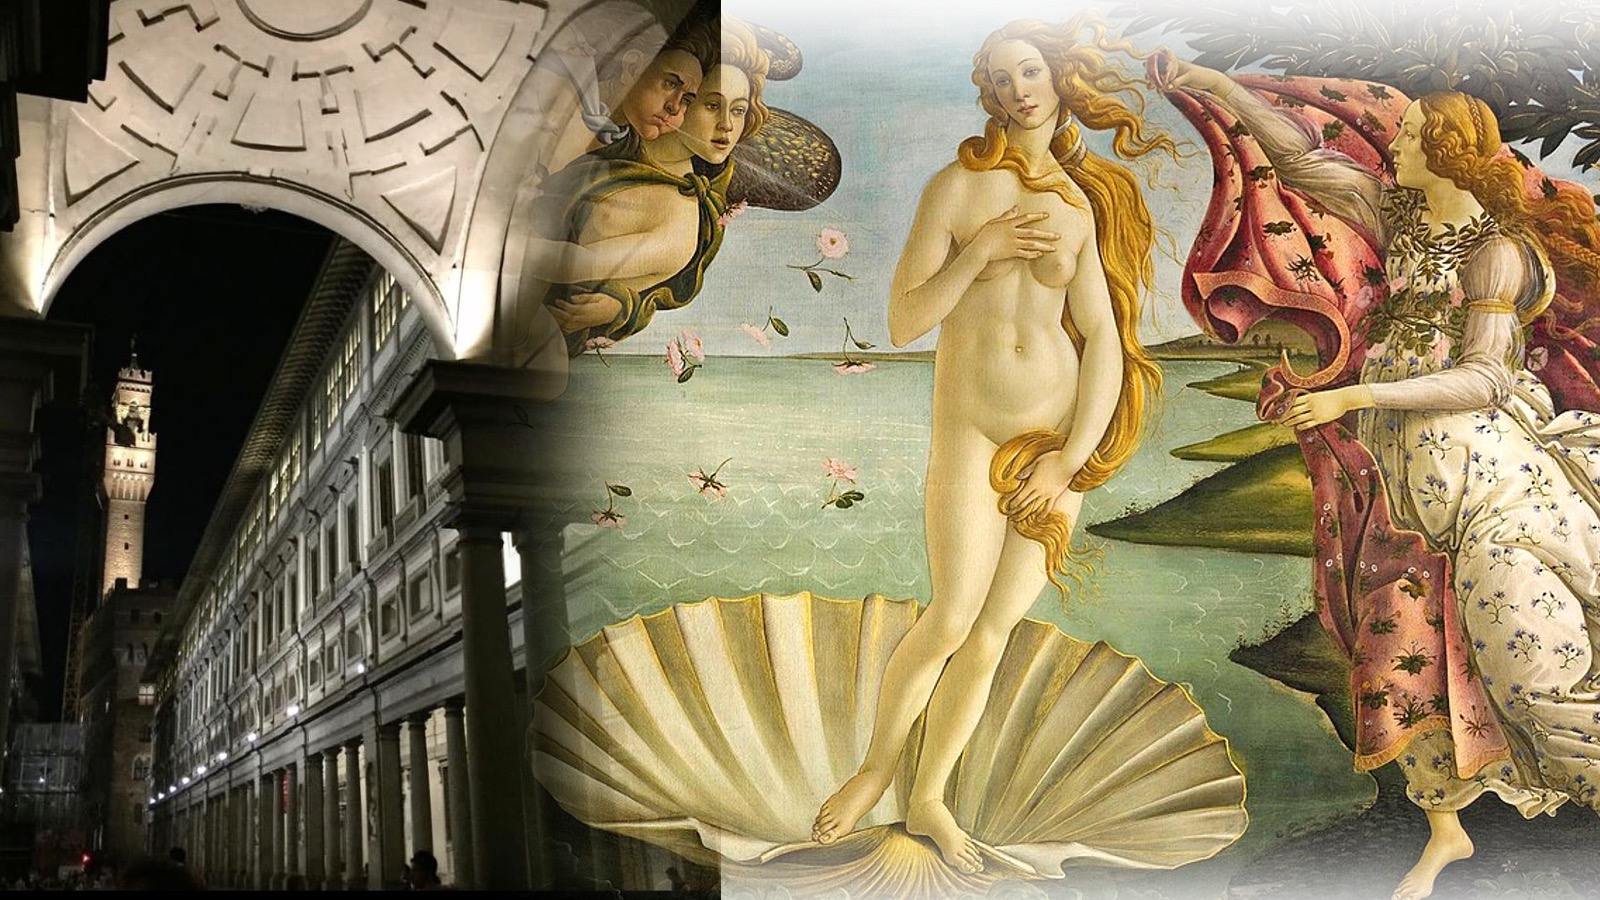 A small group tour to ensure an intimate experience and see masterpieces by Botticelli, Da Vinci, Michelangelo